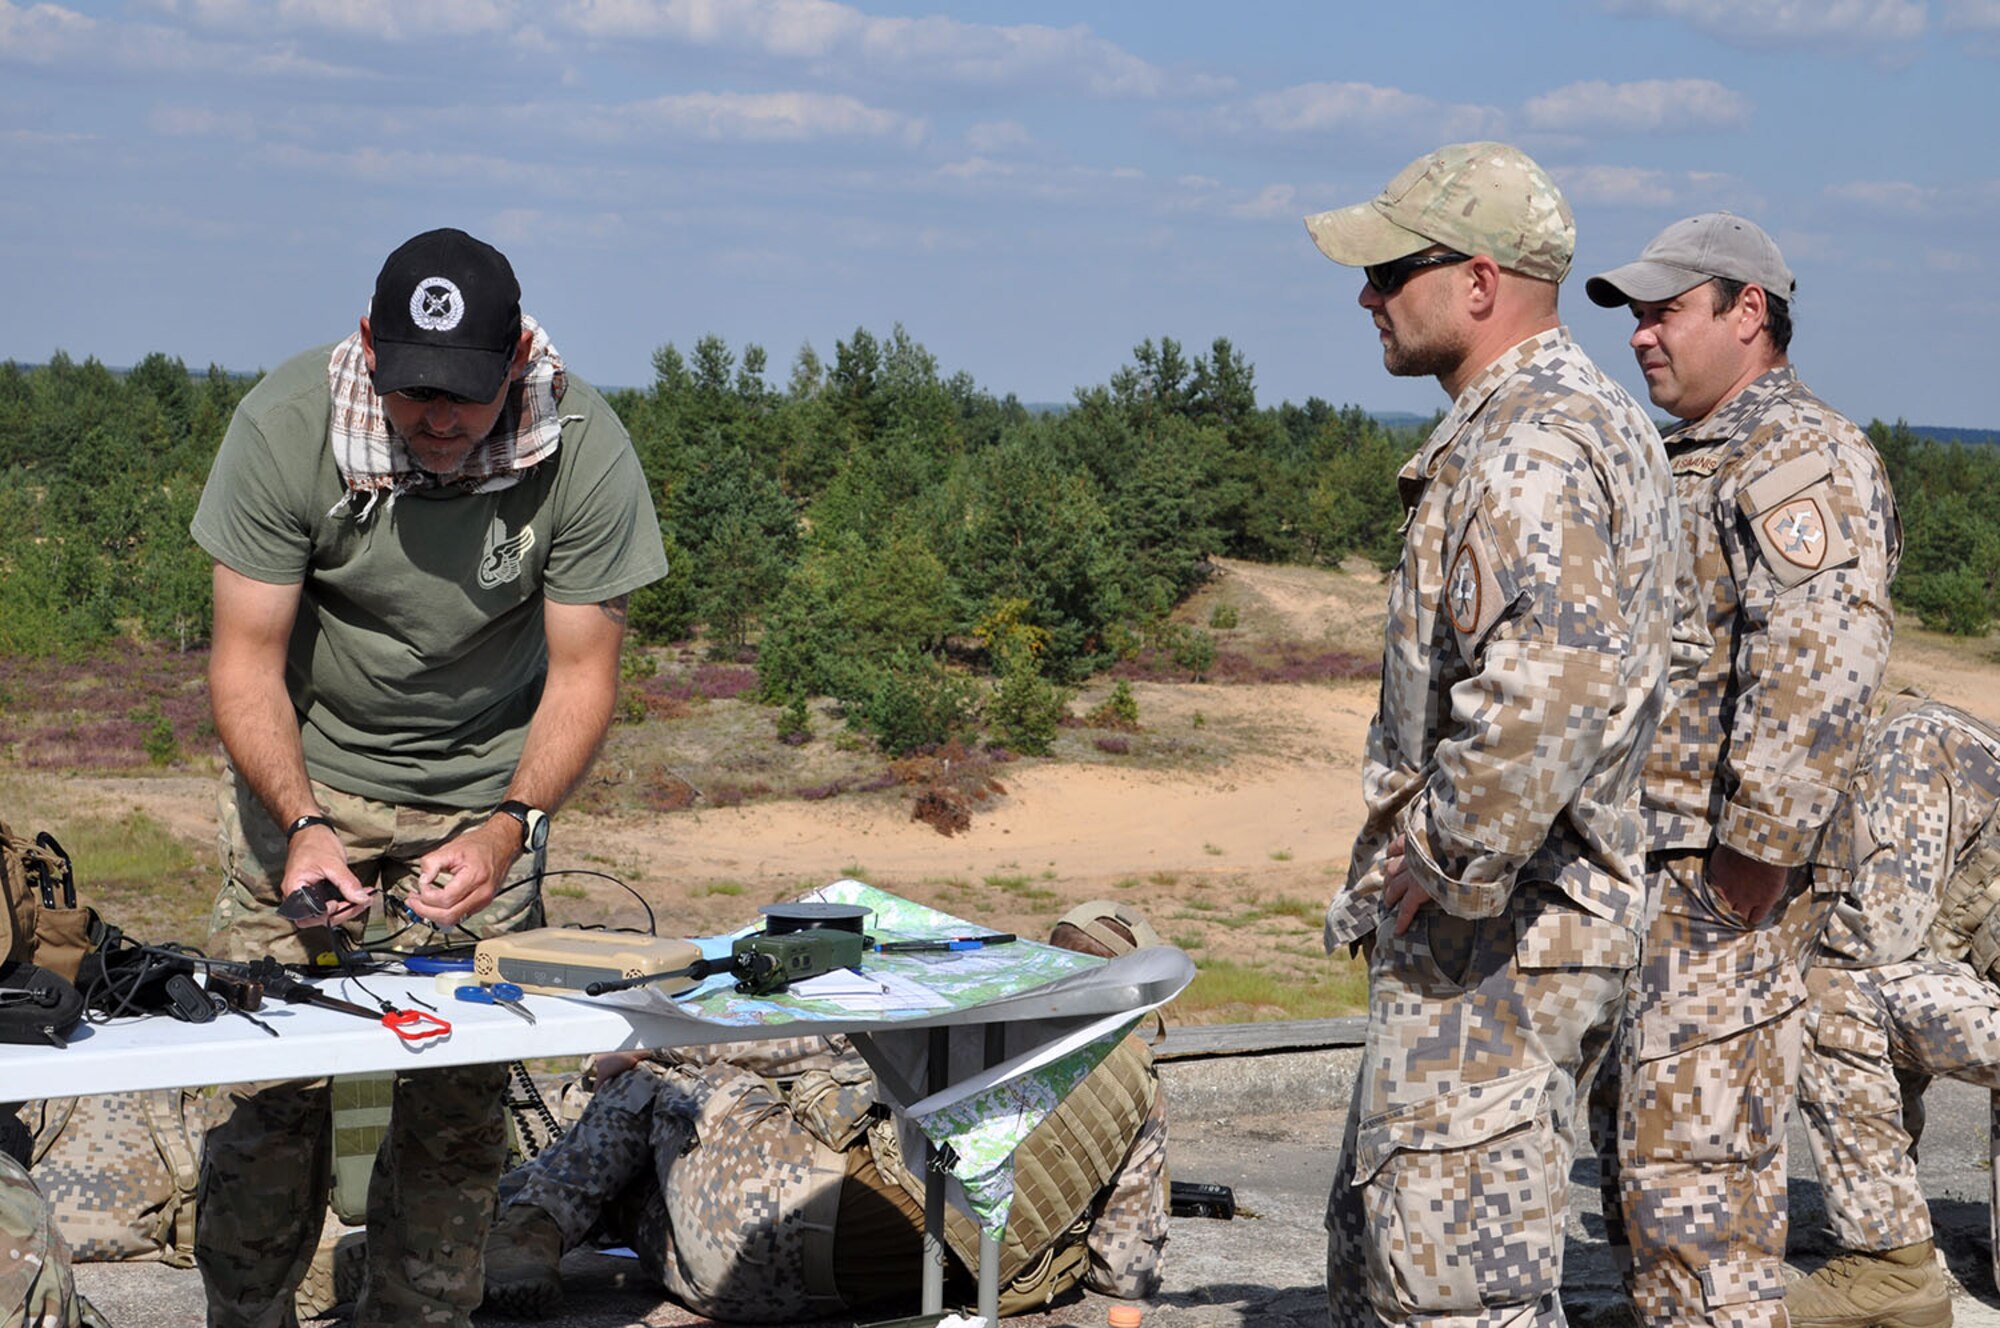 Master Sgt. Chuck Barth, a Joint Terminal Attack Controller with the Combat Readiness Training Center from Alpena, Mich., trains Sgt. Juris Salajves and Cpl. Andries Simanis, both with the Latvian military, on how to set up an antenna to establish communications during a range training exercise Aug. 24 at Adazi Range in Latvia. JTAC’s from two Air National Guard units are training with the Latvians in ground maneuvers calling for close air support using A-10 Thunderbolt IIs with the 442d Fighter Wing from Whiteman Air Force Base, Mo. U.S. forces are training with NATO allies as part of Operation Atlantic Resolve. (U.S. Air Force photo by Capt. Denise Haeussler)